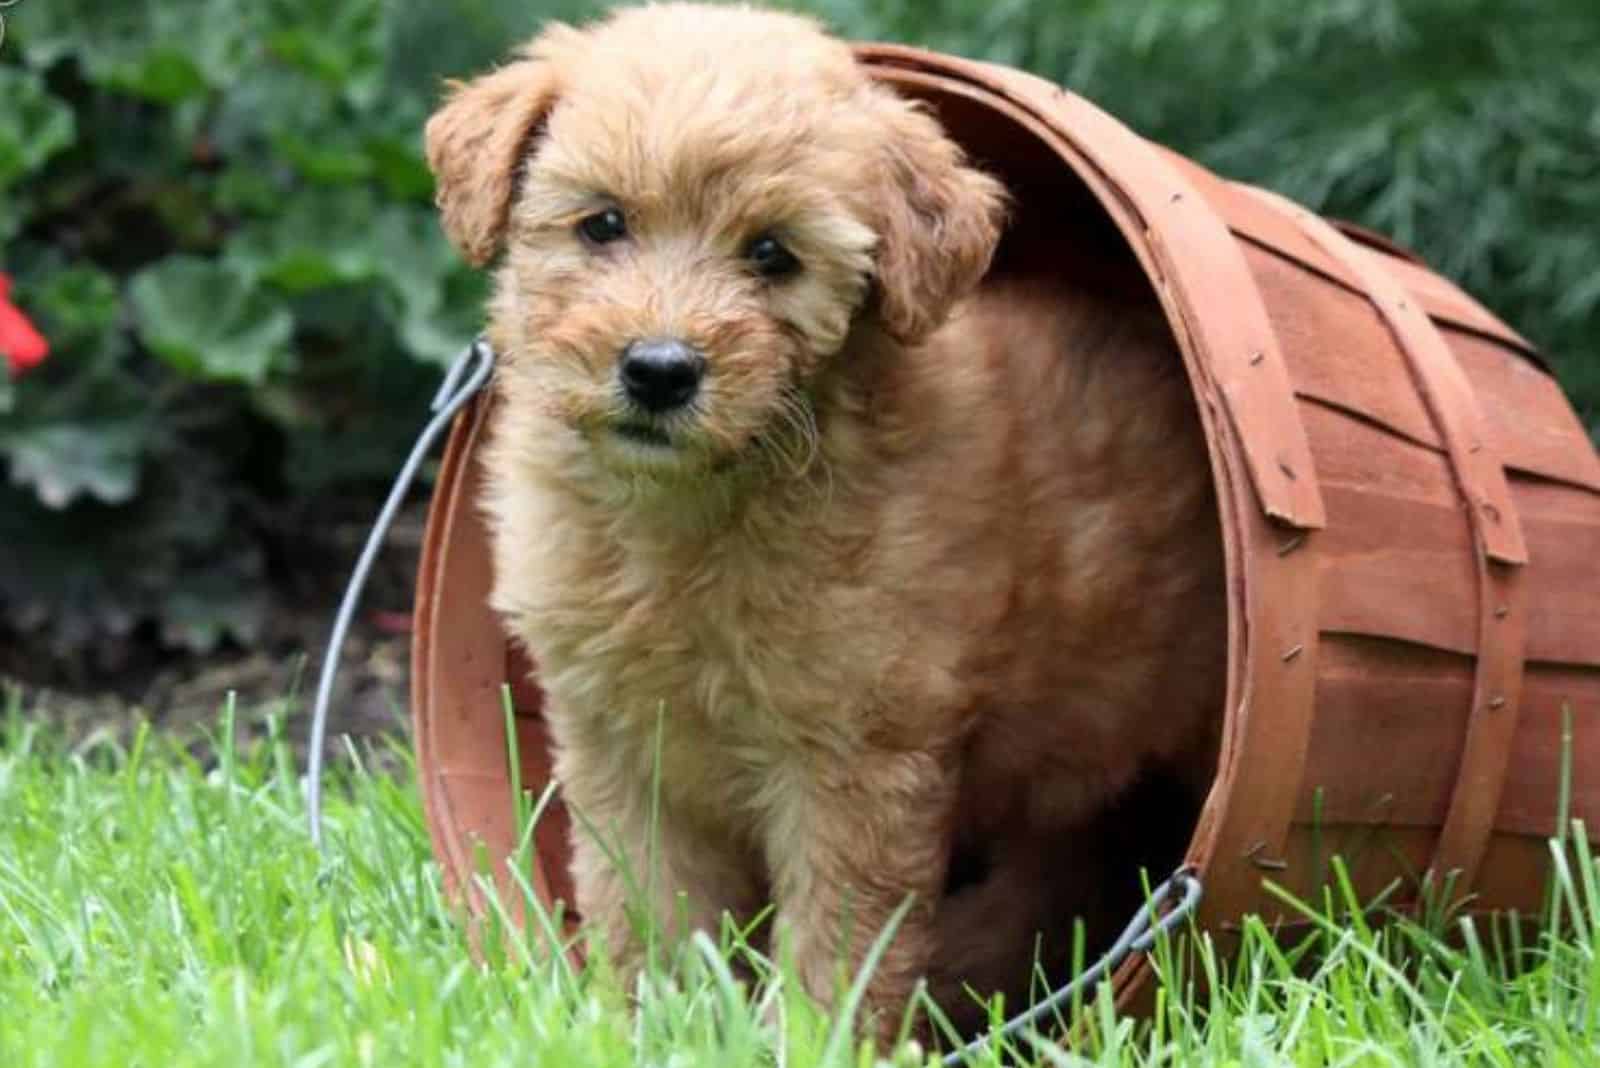 Whoodle Puppy is standing in a bucket